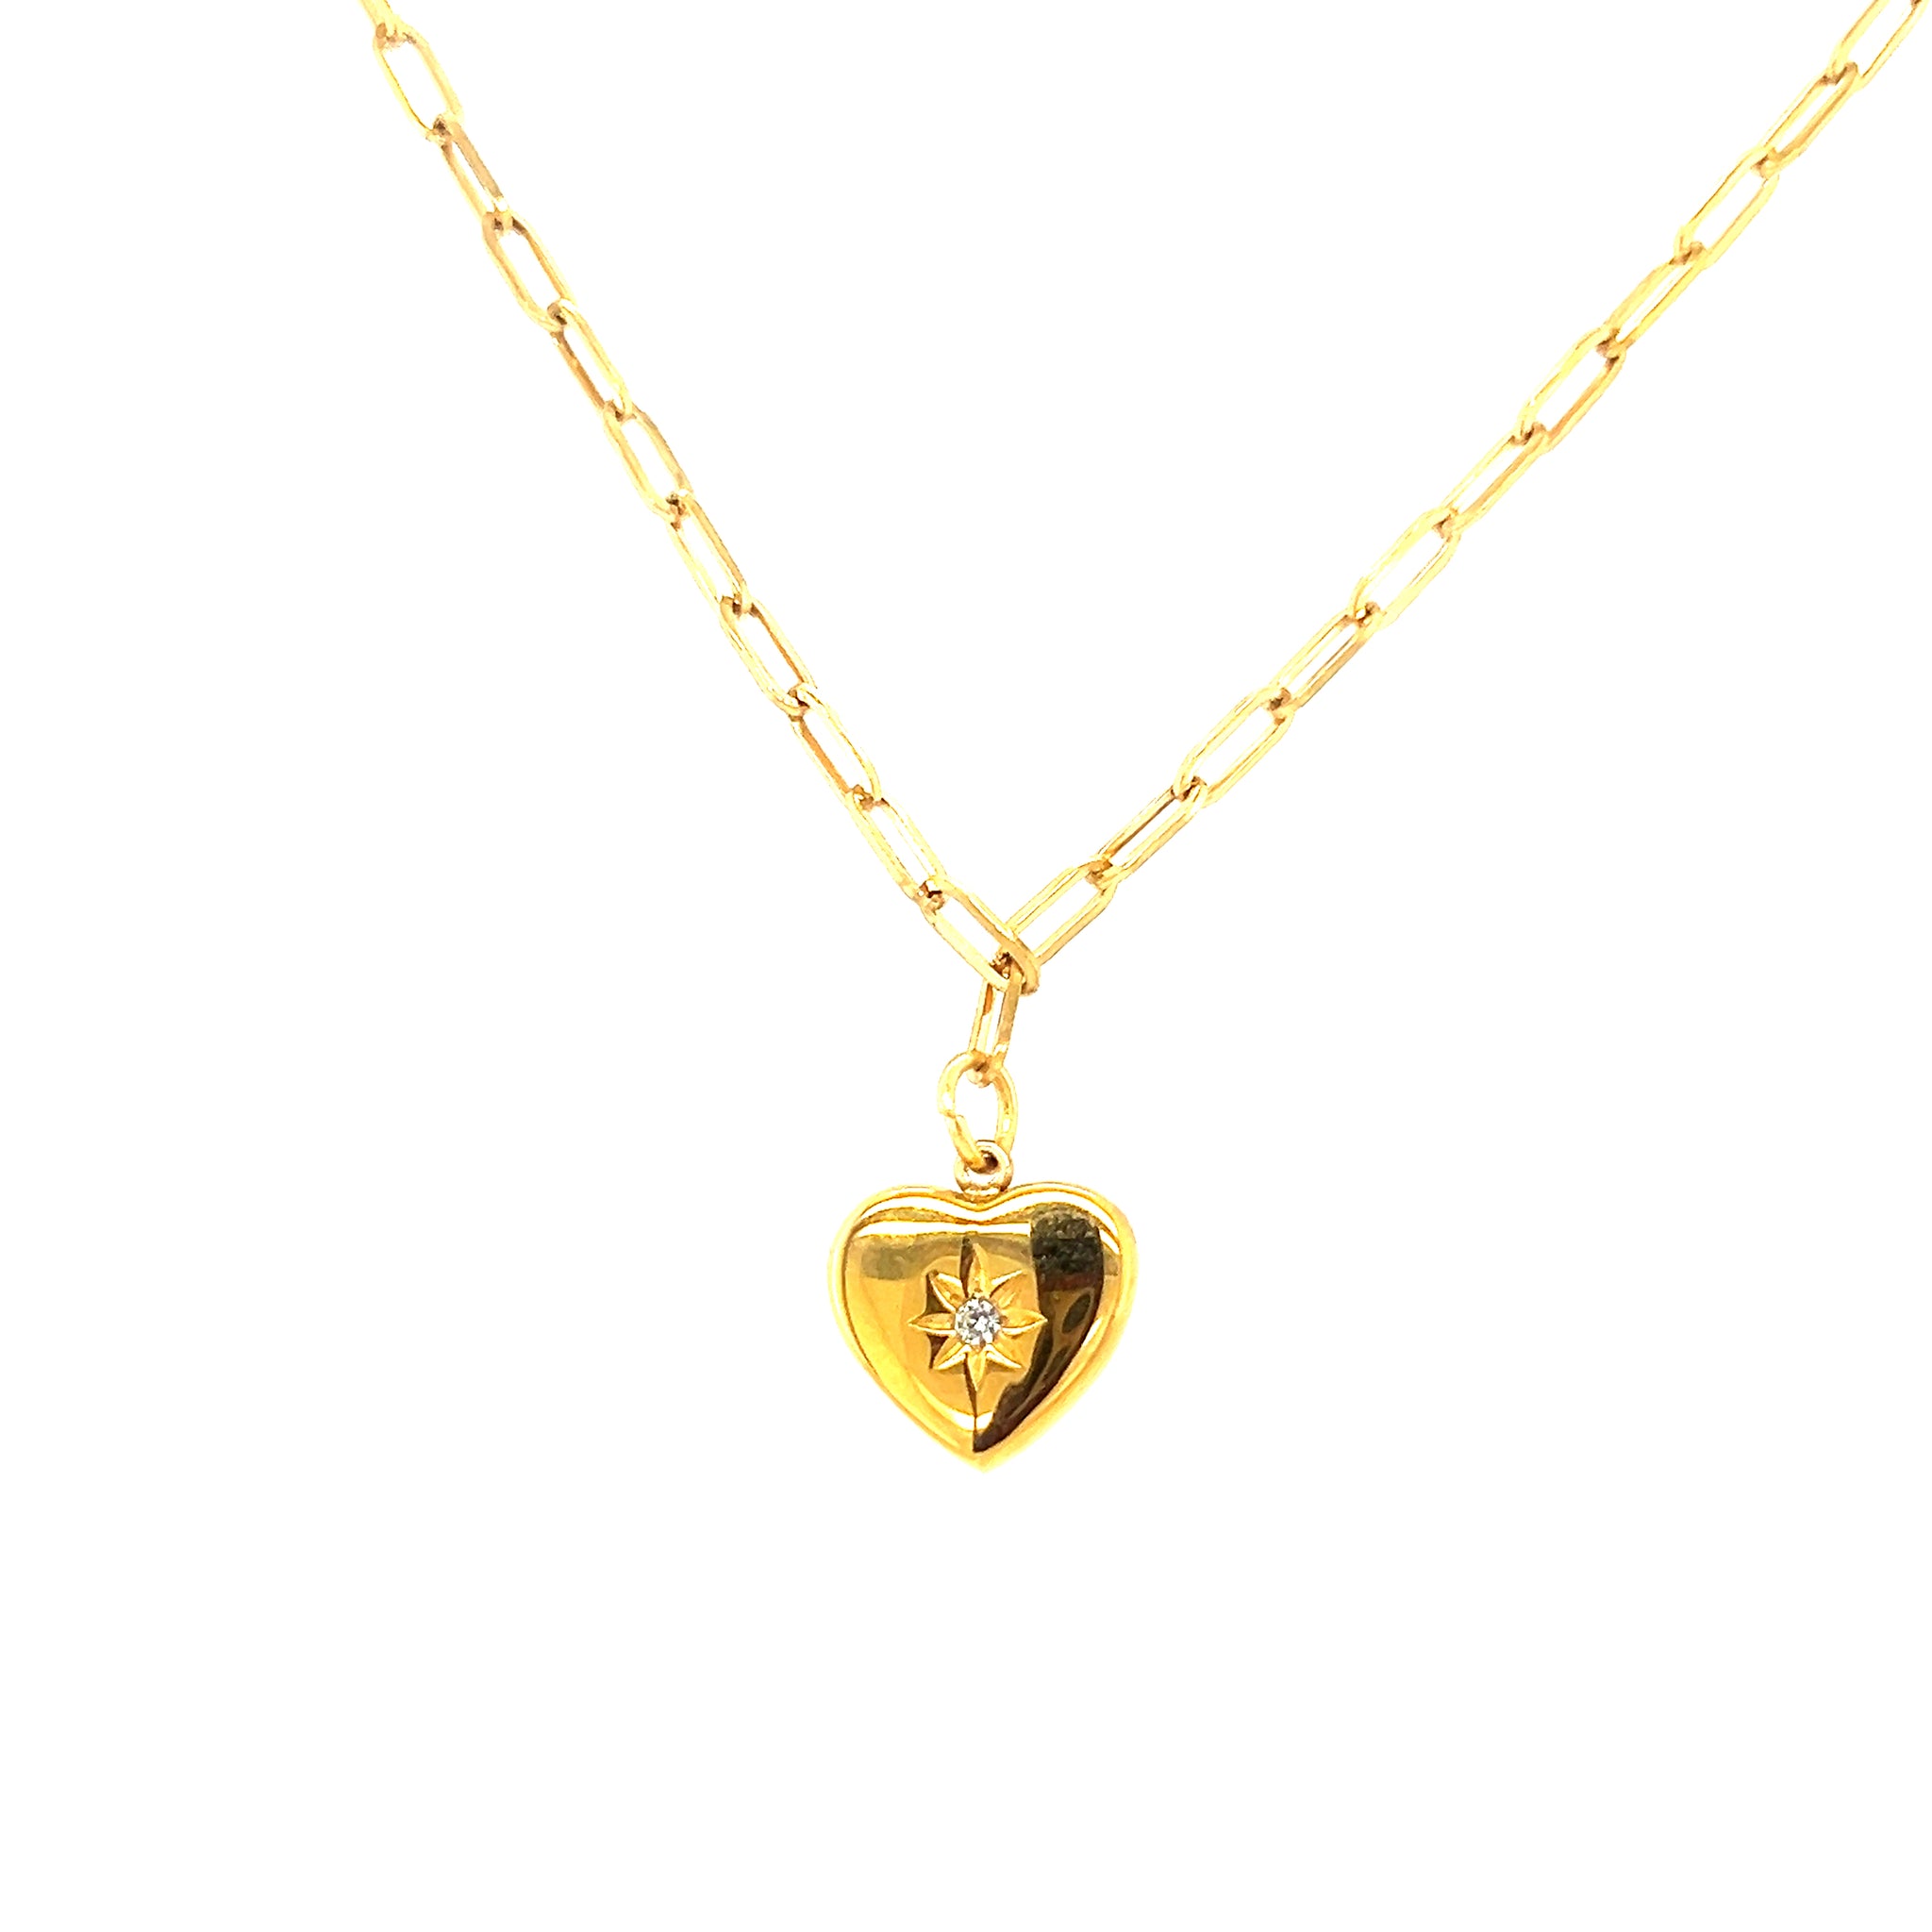 Holly Heart Necklace